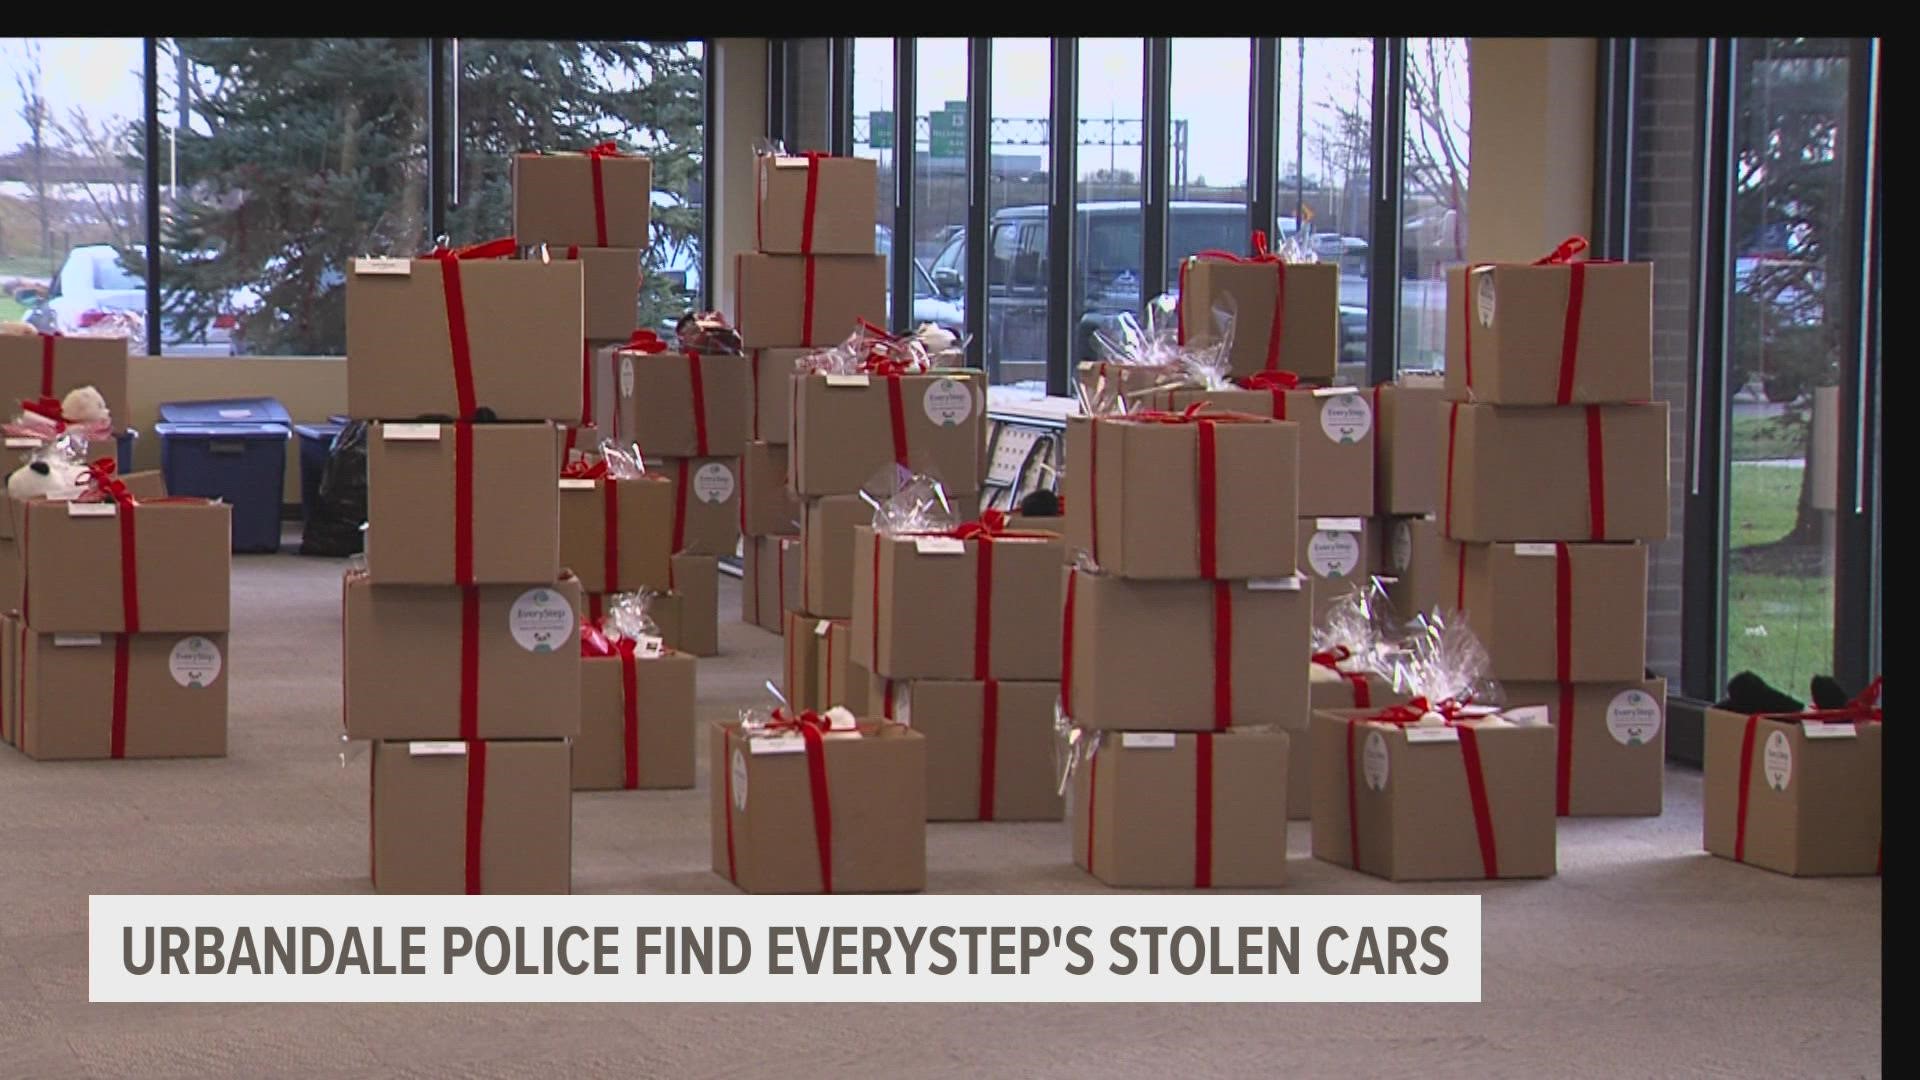 EveryStep's mission is to provide 12 gifts to people who are experiencing their first holiday after a loss of a loved one. Around 50 of those gifts were stolen.